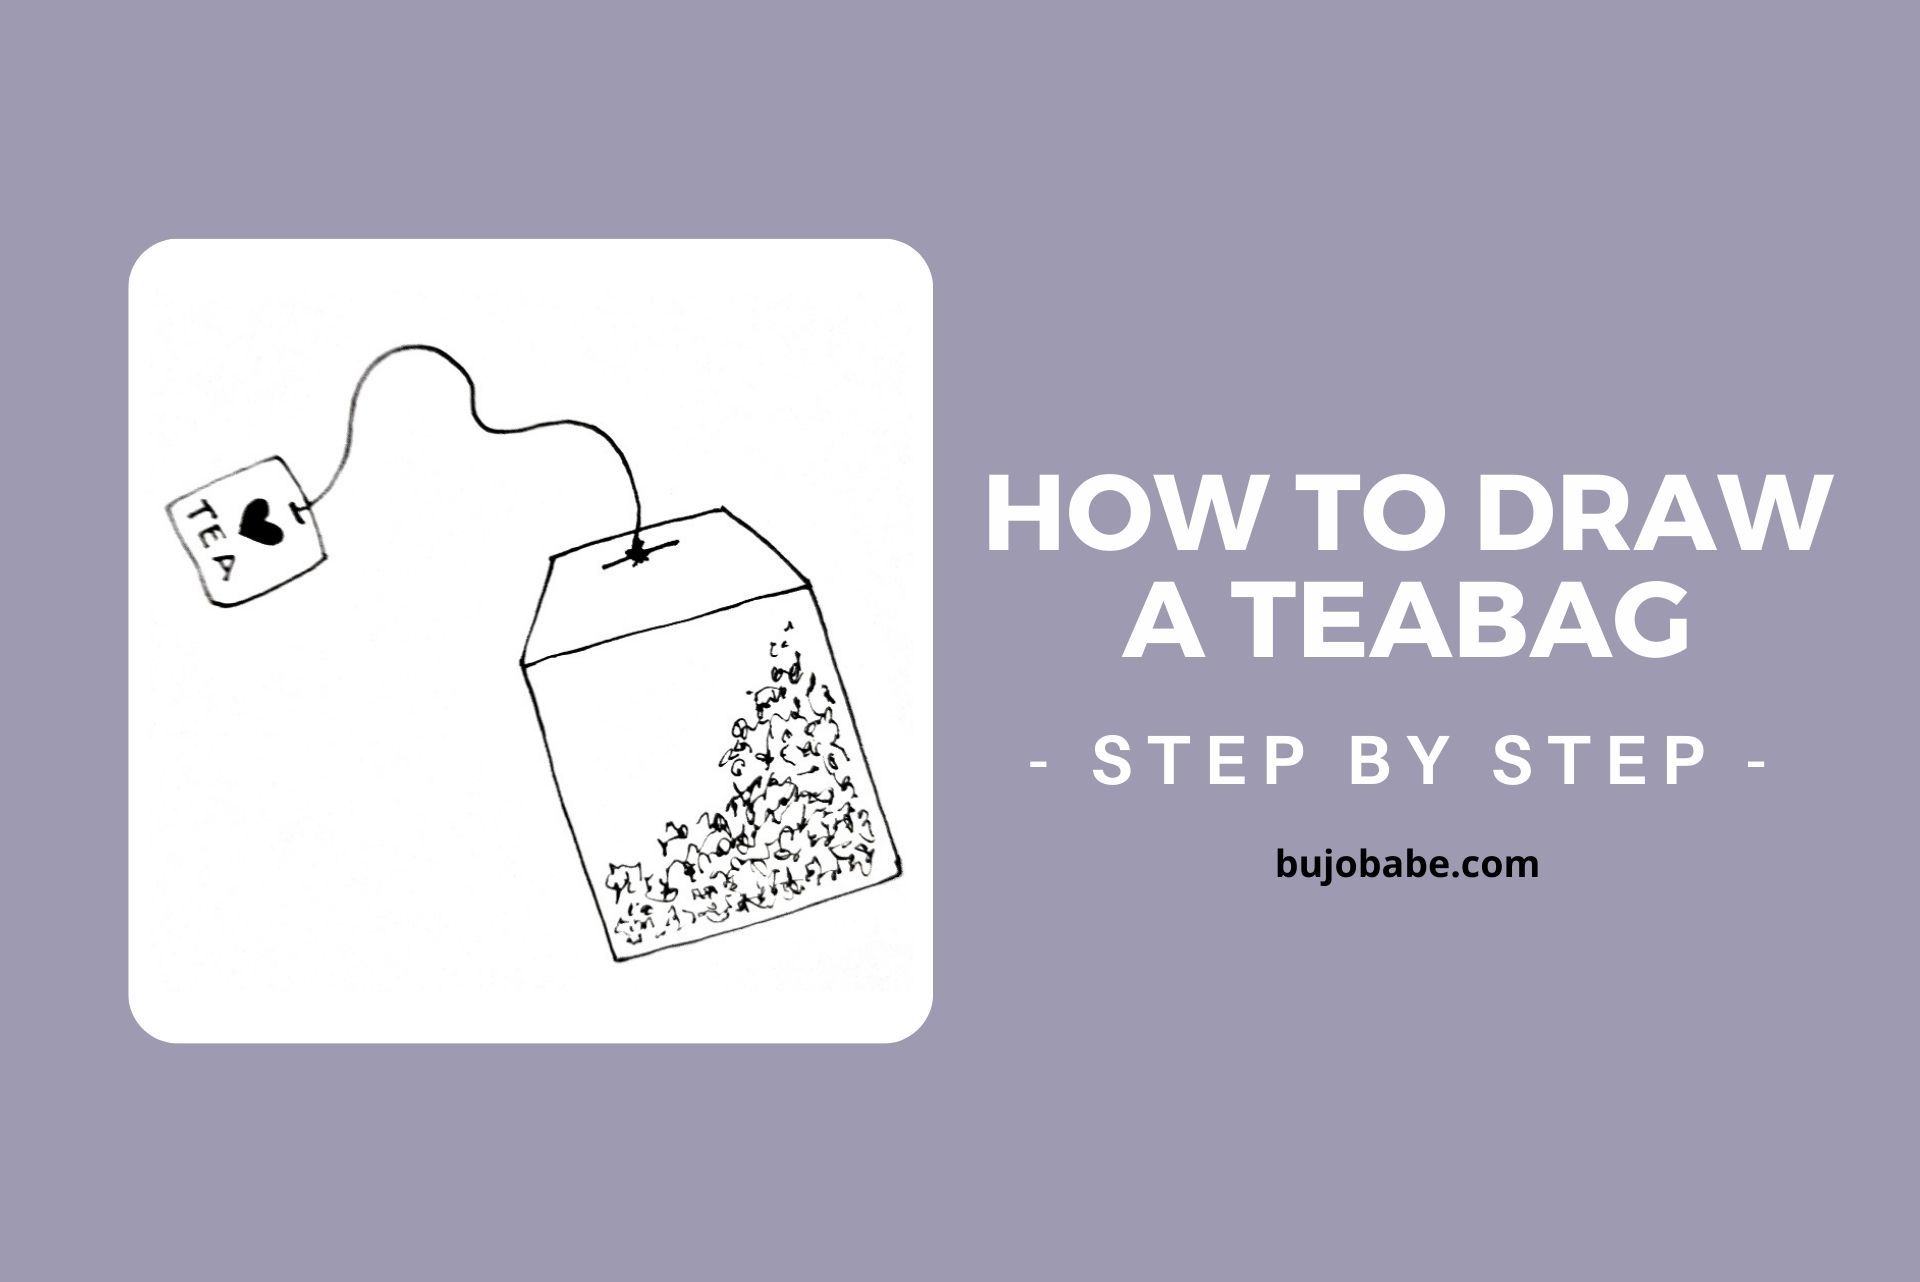 how to draw a teabag step by step